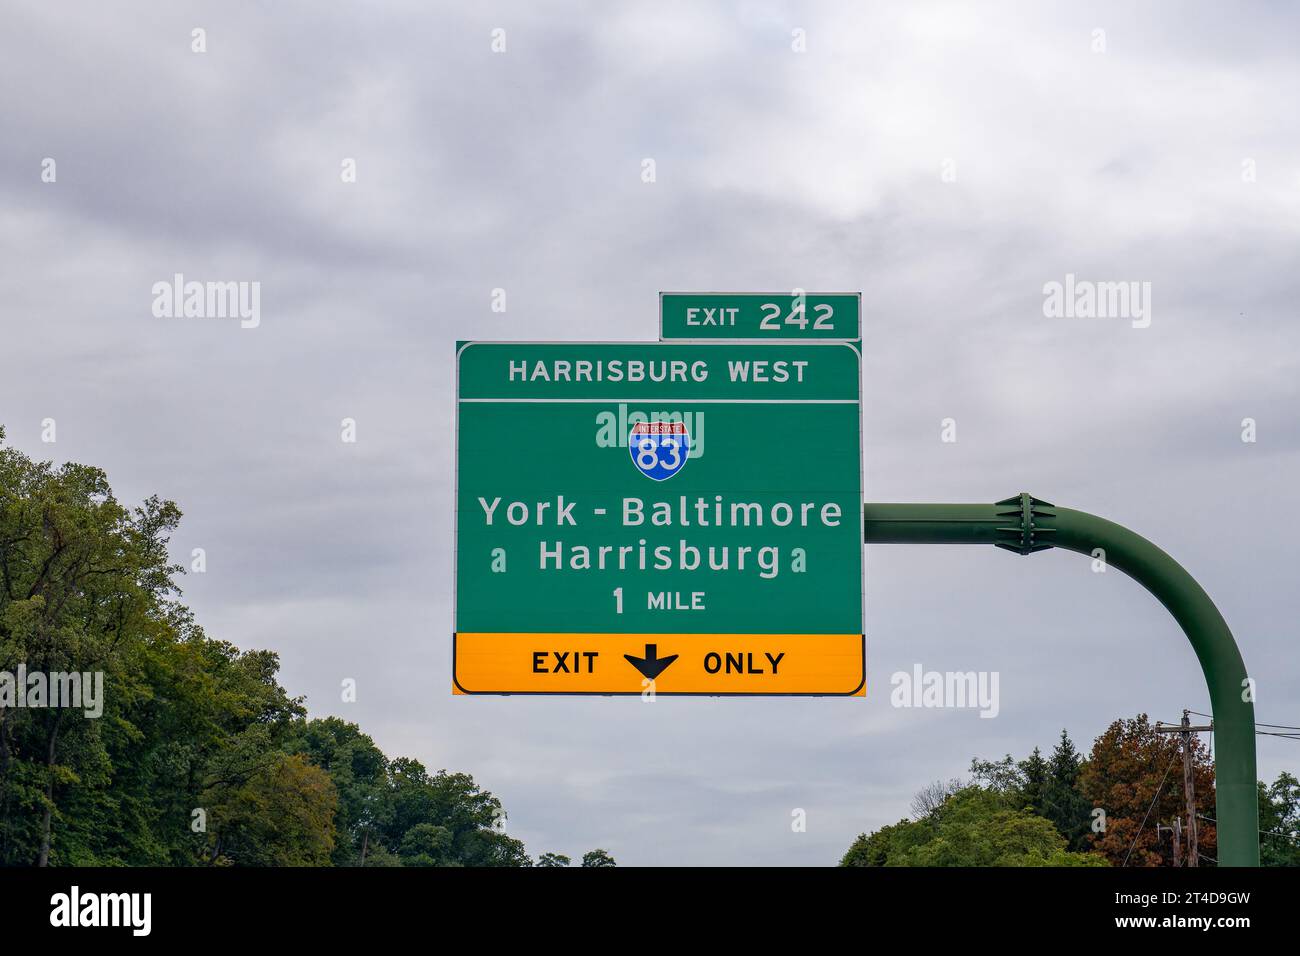 Exit 242 sign on I-76 Pennsylvania Turnpike for Interstate 83 toward York - Baltimore or Harrisburg Stock Photo